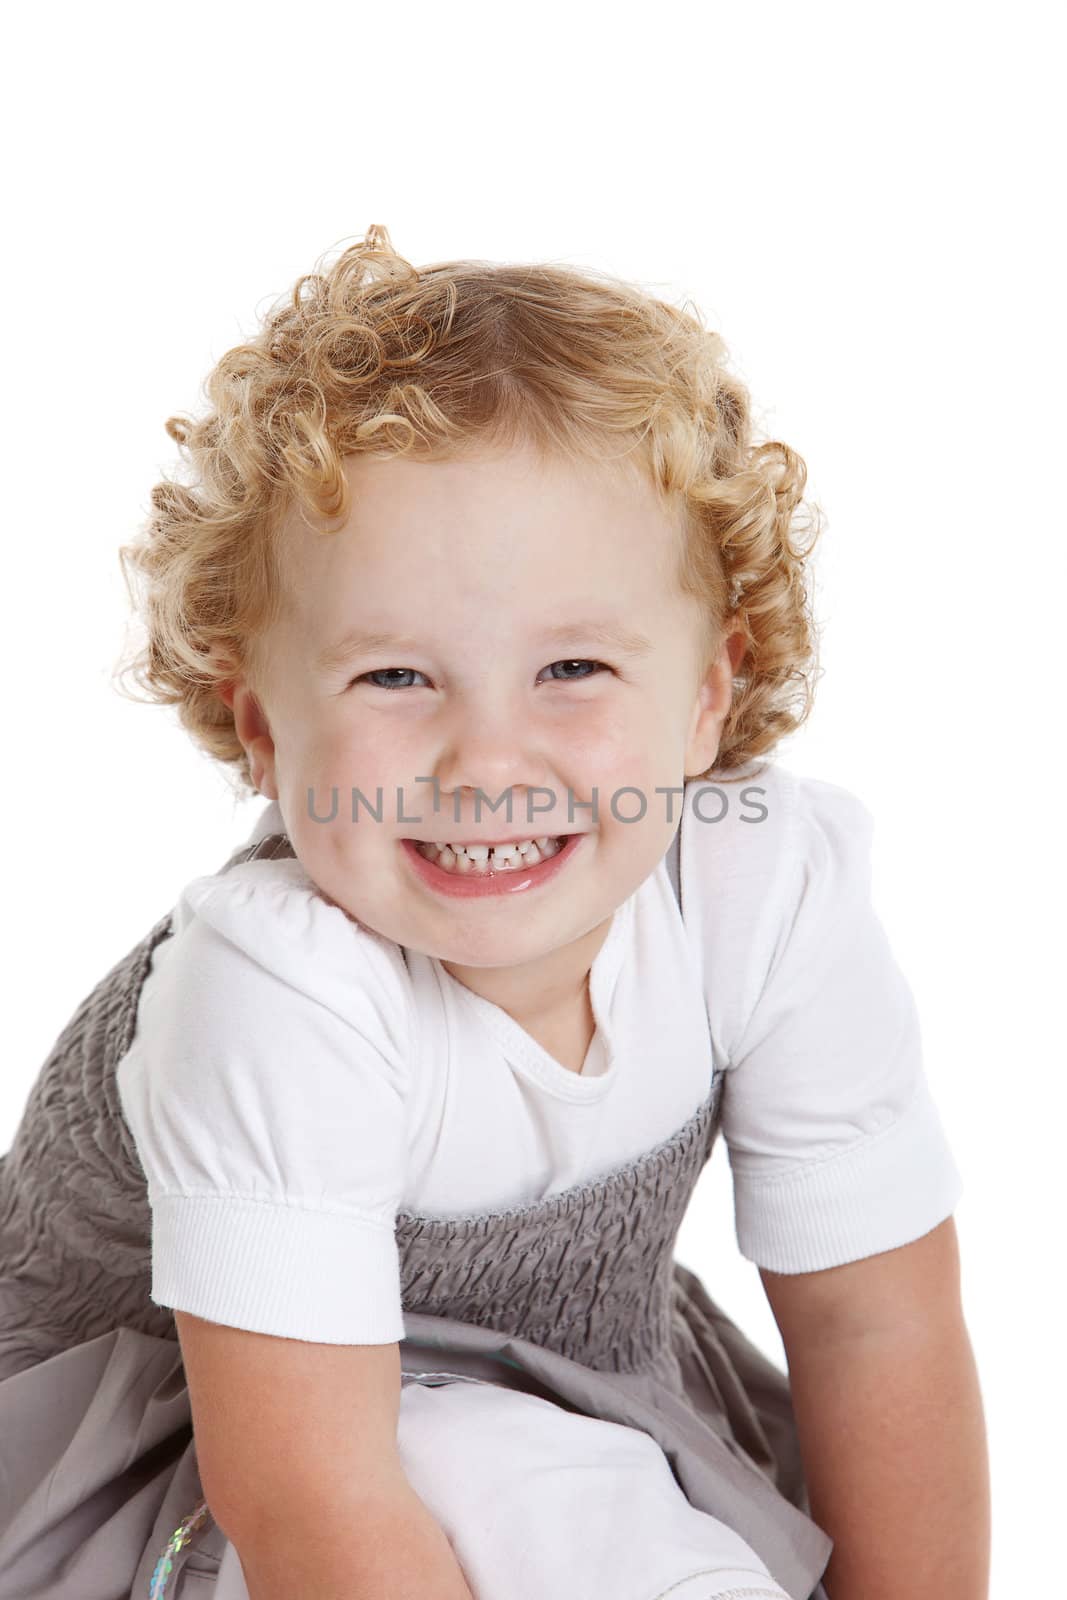 Adorably young girl with a cheeky grin on her face